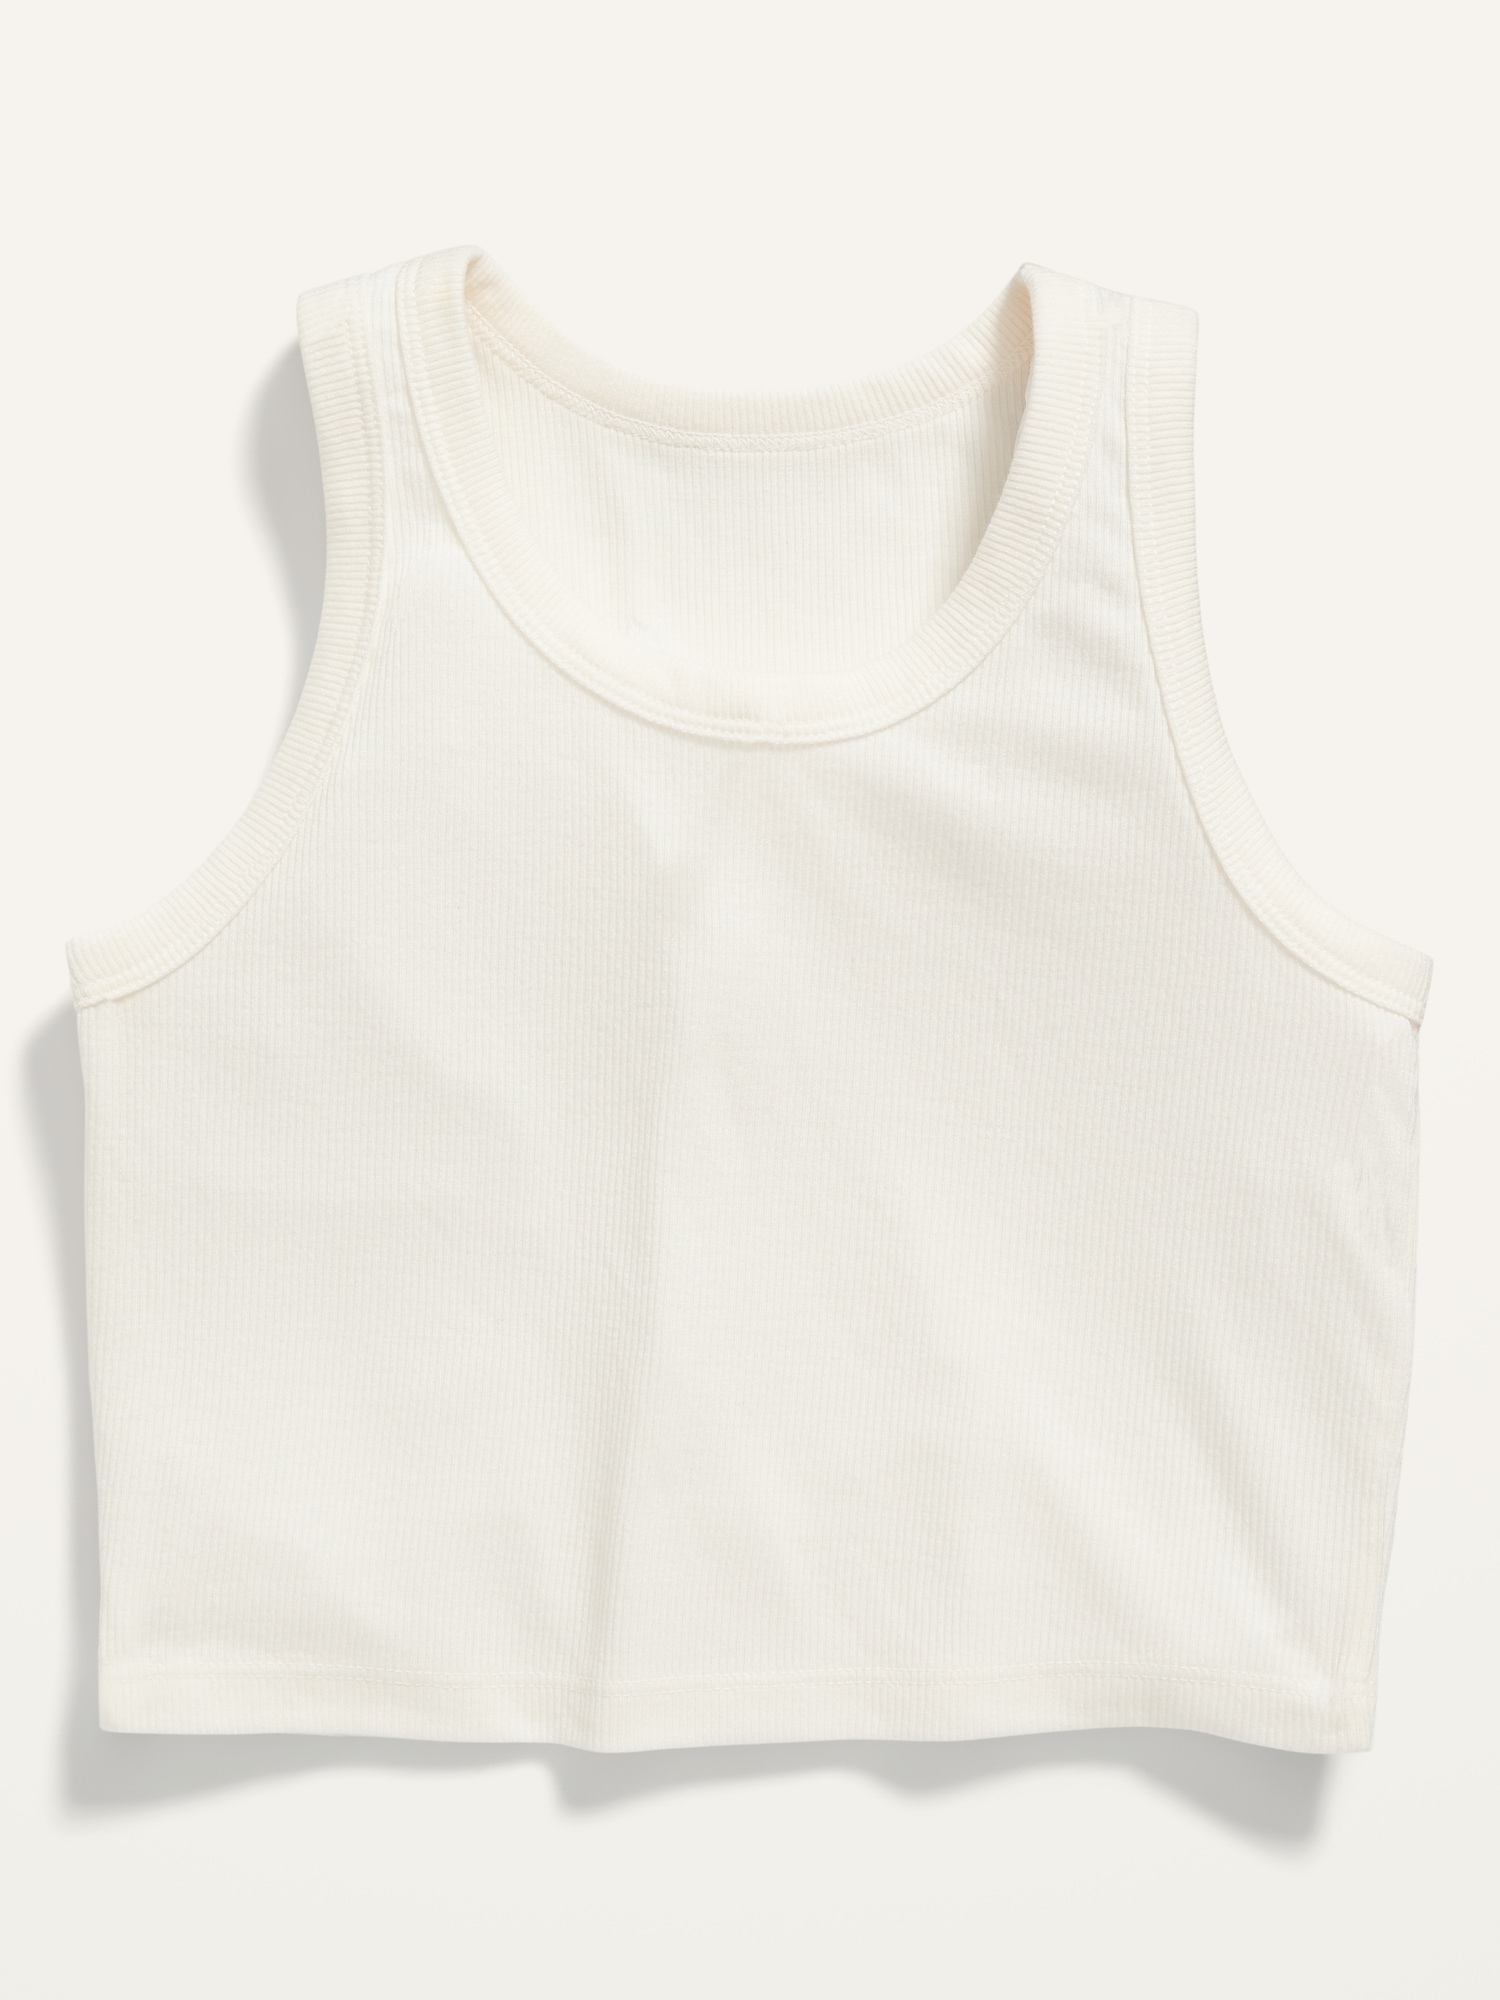 Old Navy Cropped UltraLite Rib-Knit Performance Tank for Girls white. 1